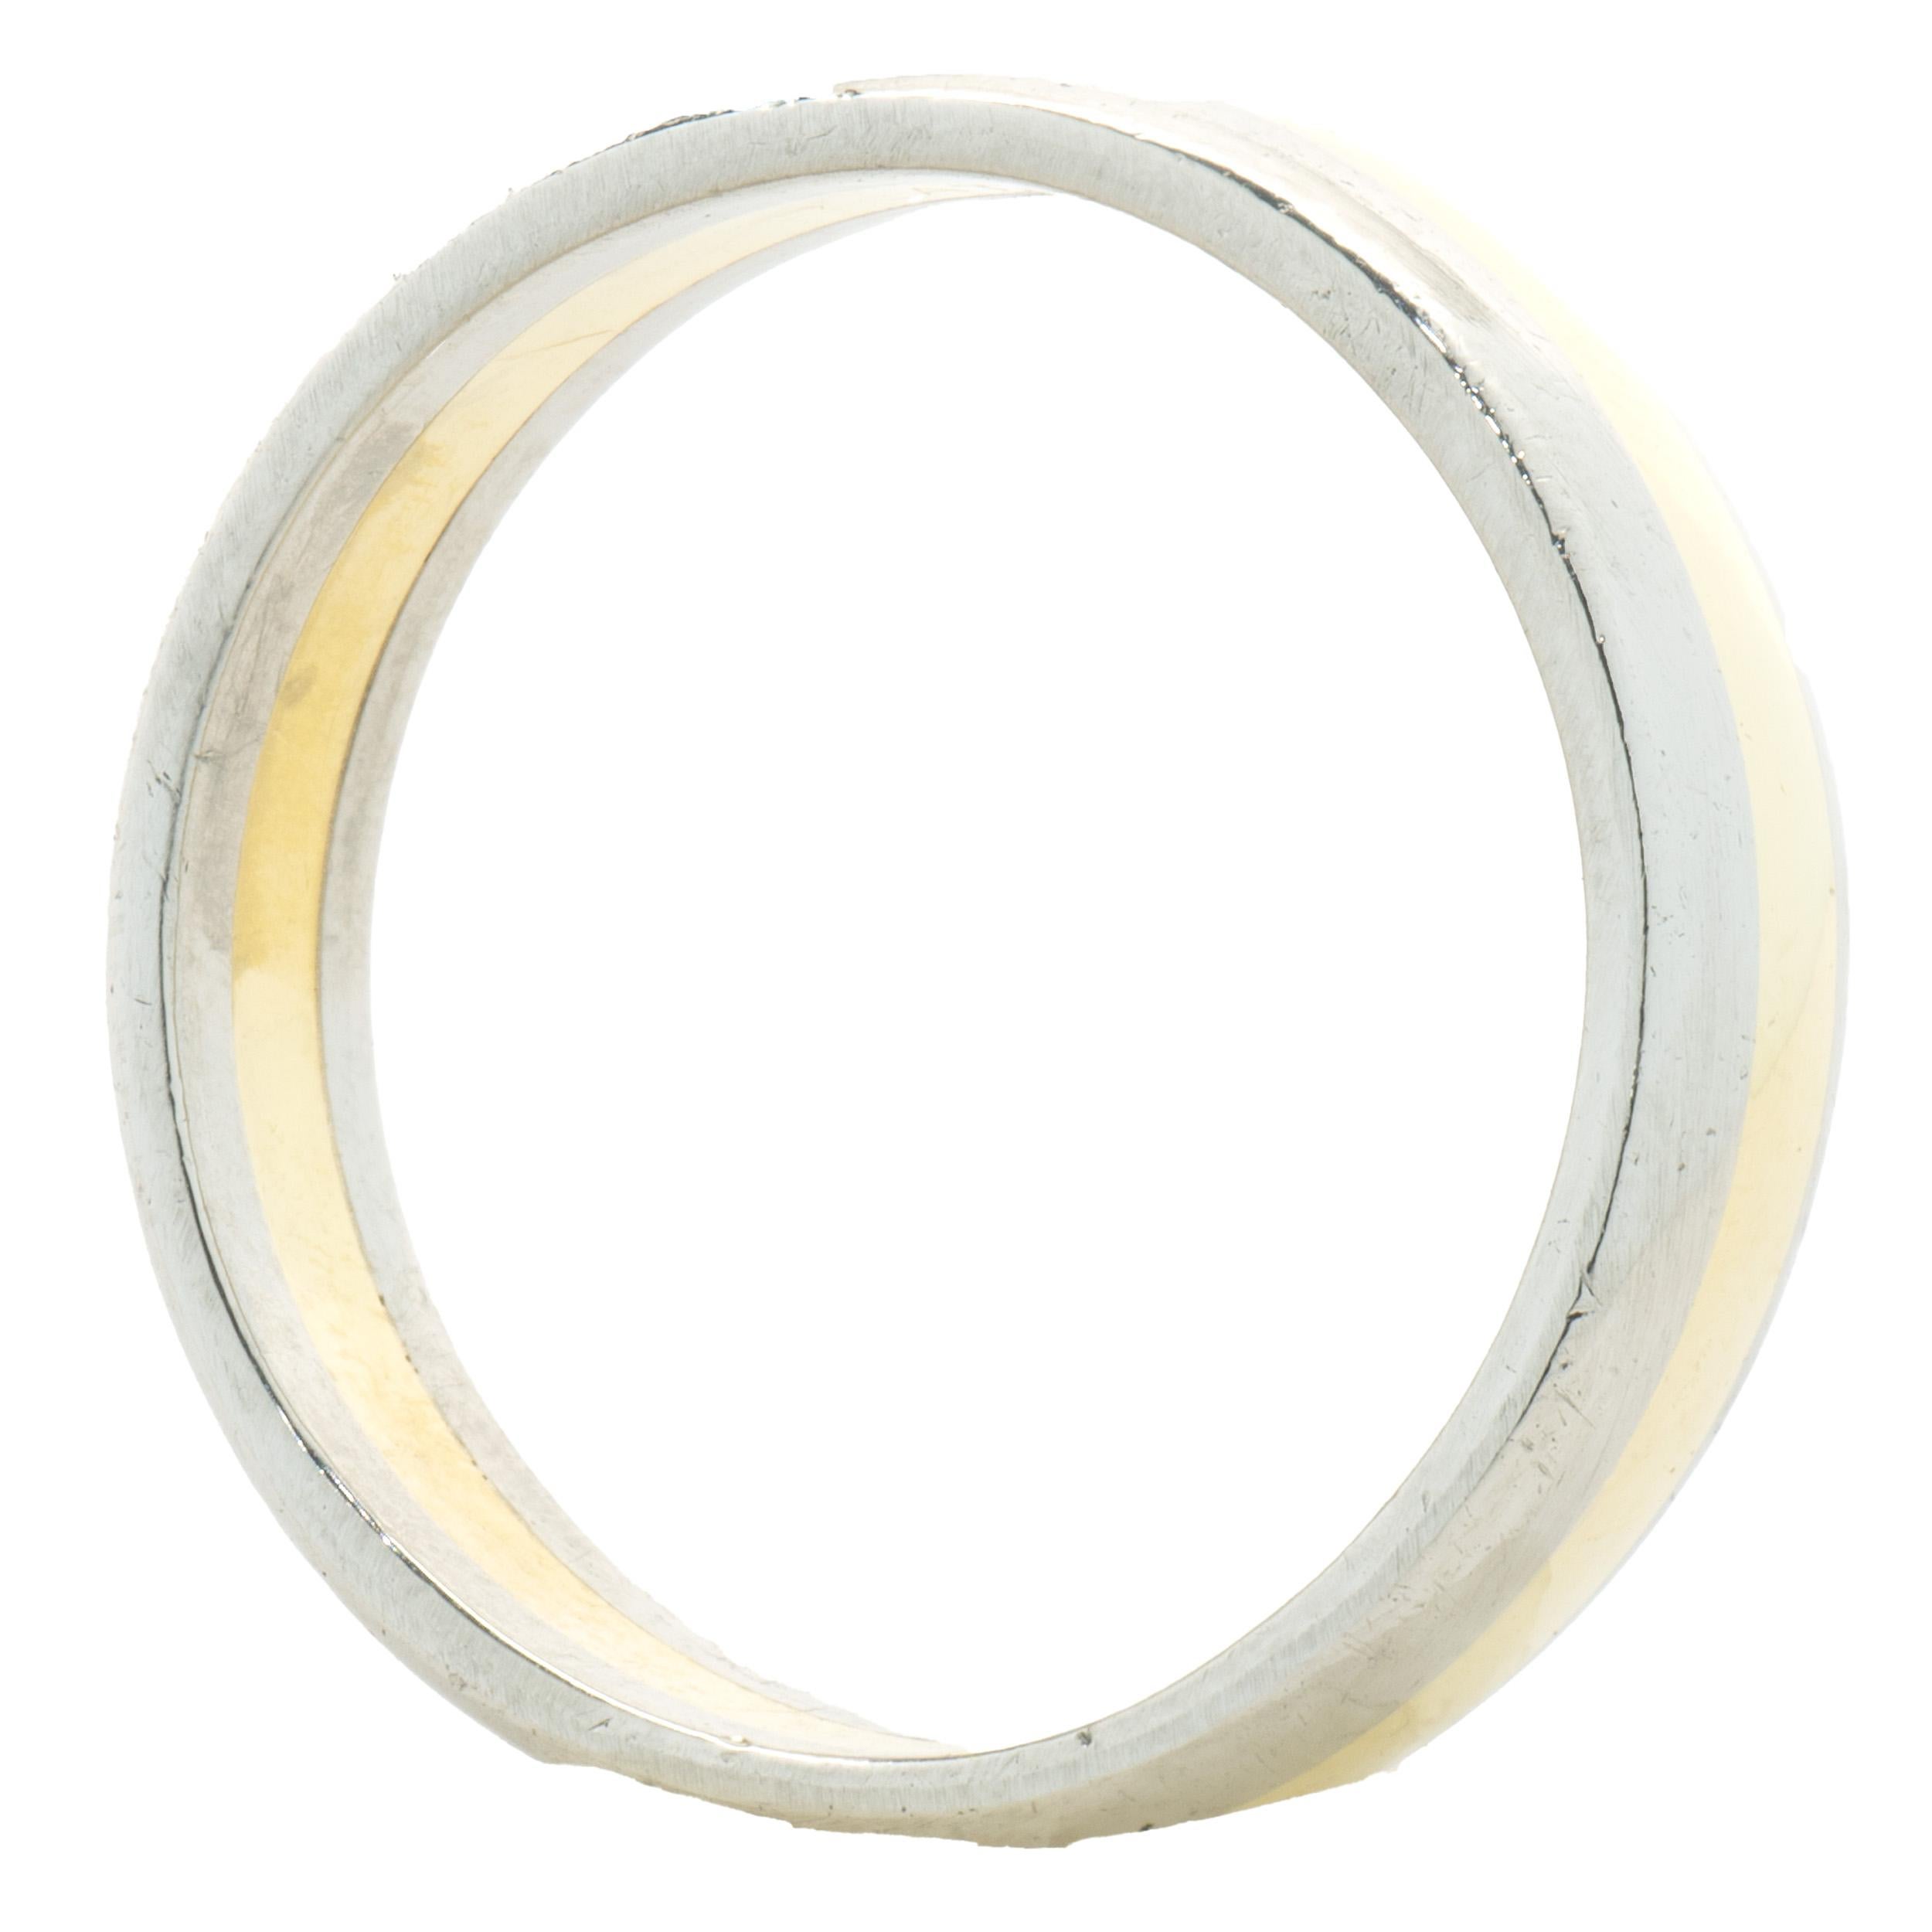 Designer: custom
Material: Platinum & 18K yellow gold
Dimensions: band measures 5.5mm wide
Size: 9.25
Weight:9.92 grams
